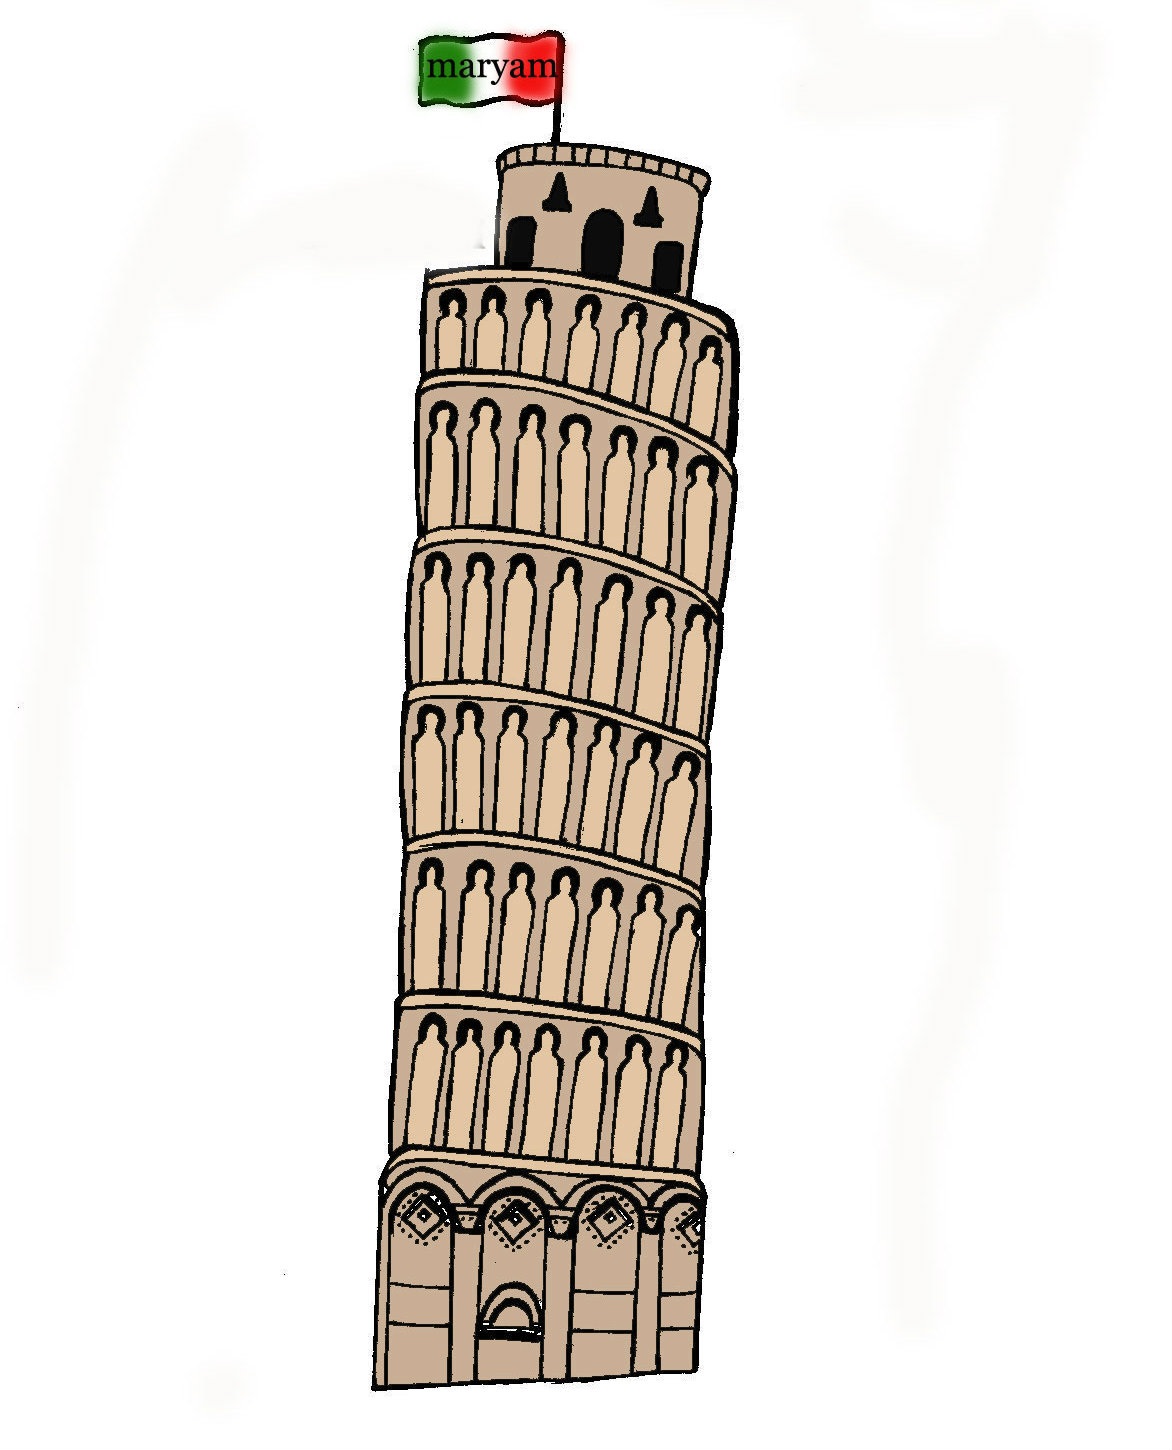 Leaning Tower of Pisa Royalty